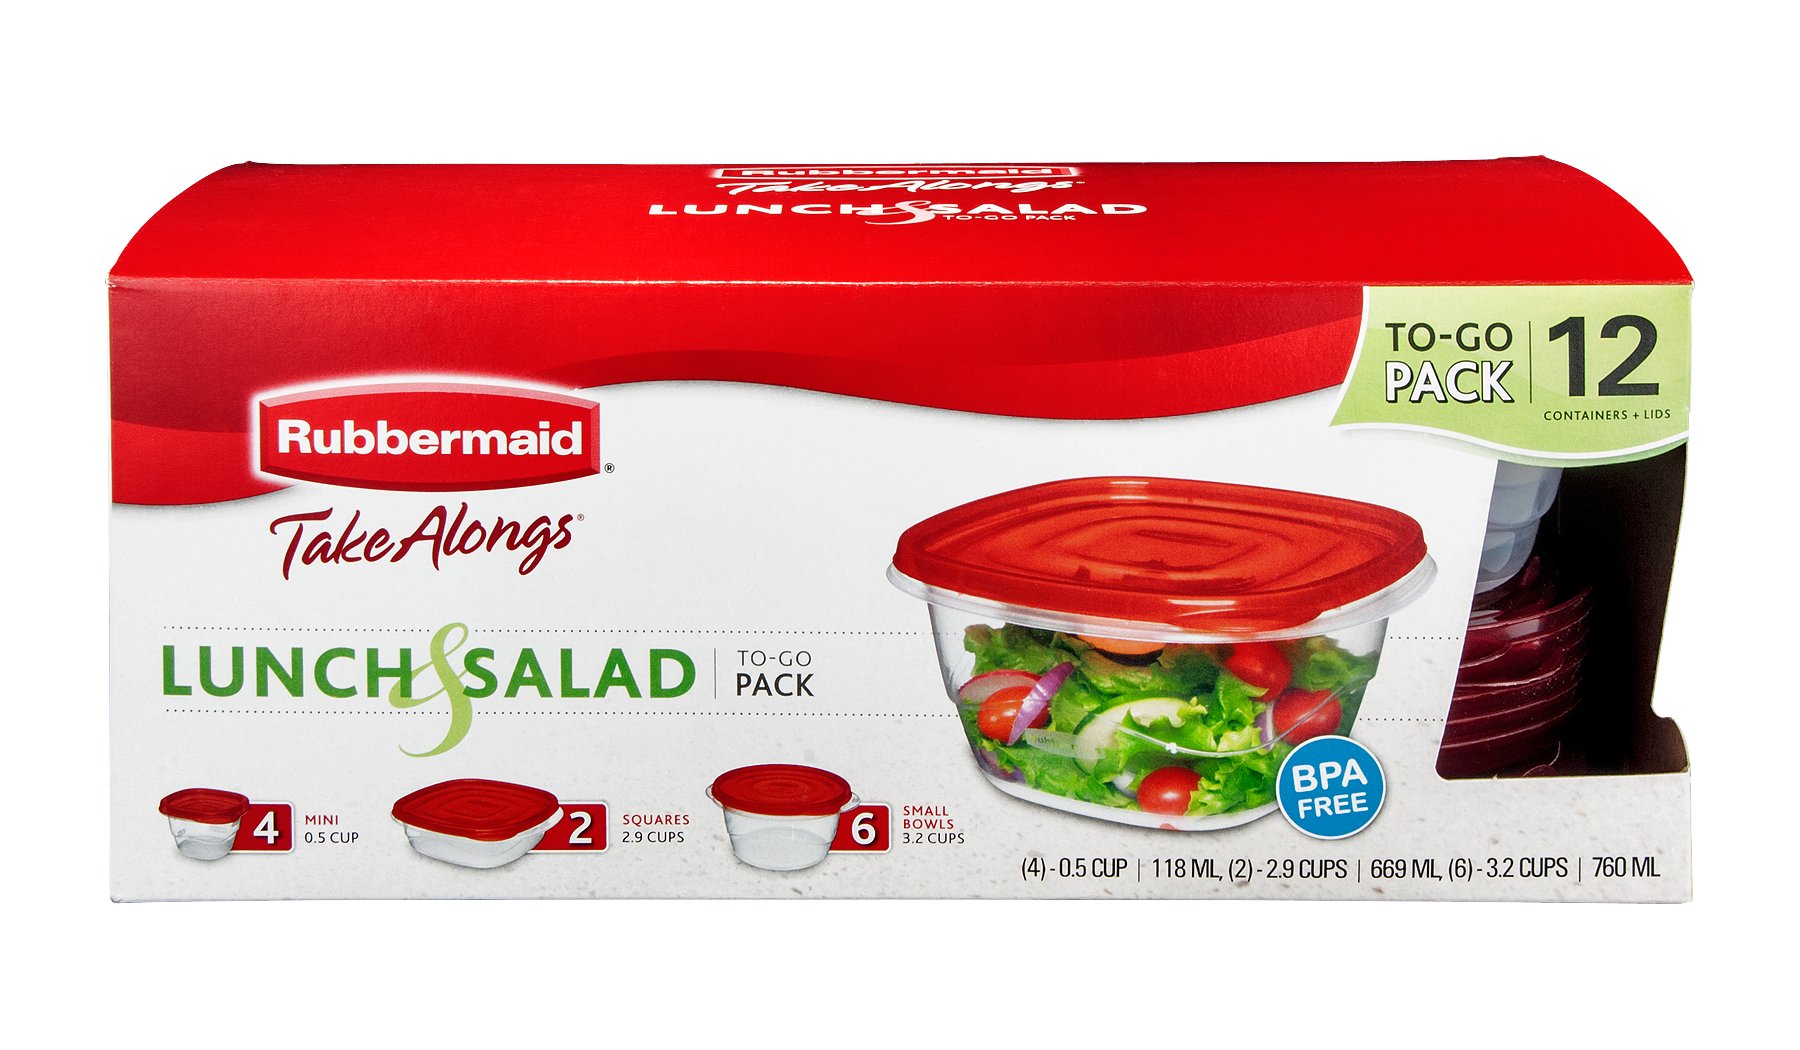 Rubbermaid Take Alongs Containers & Lids, Squares - 4 containers & lids